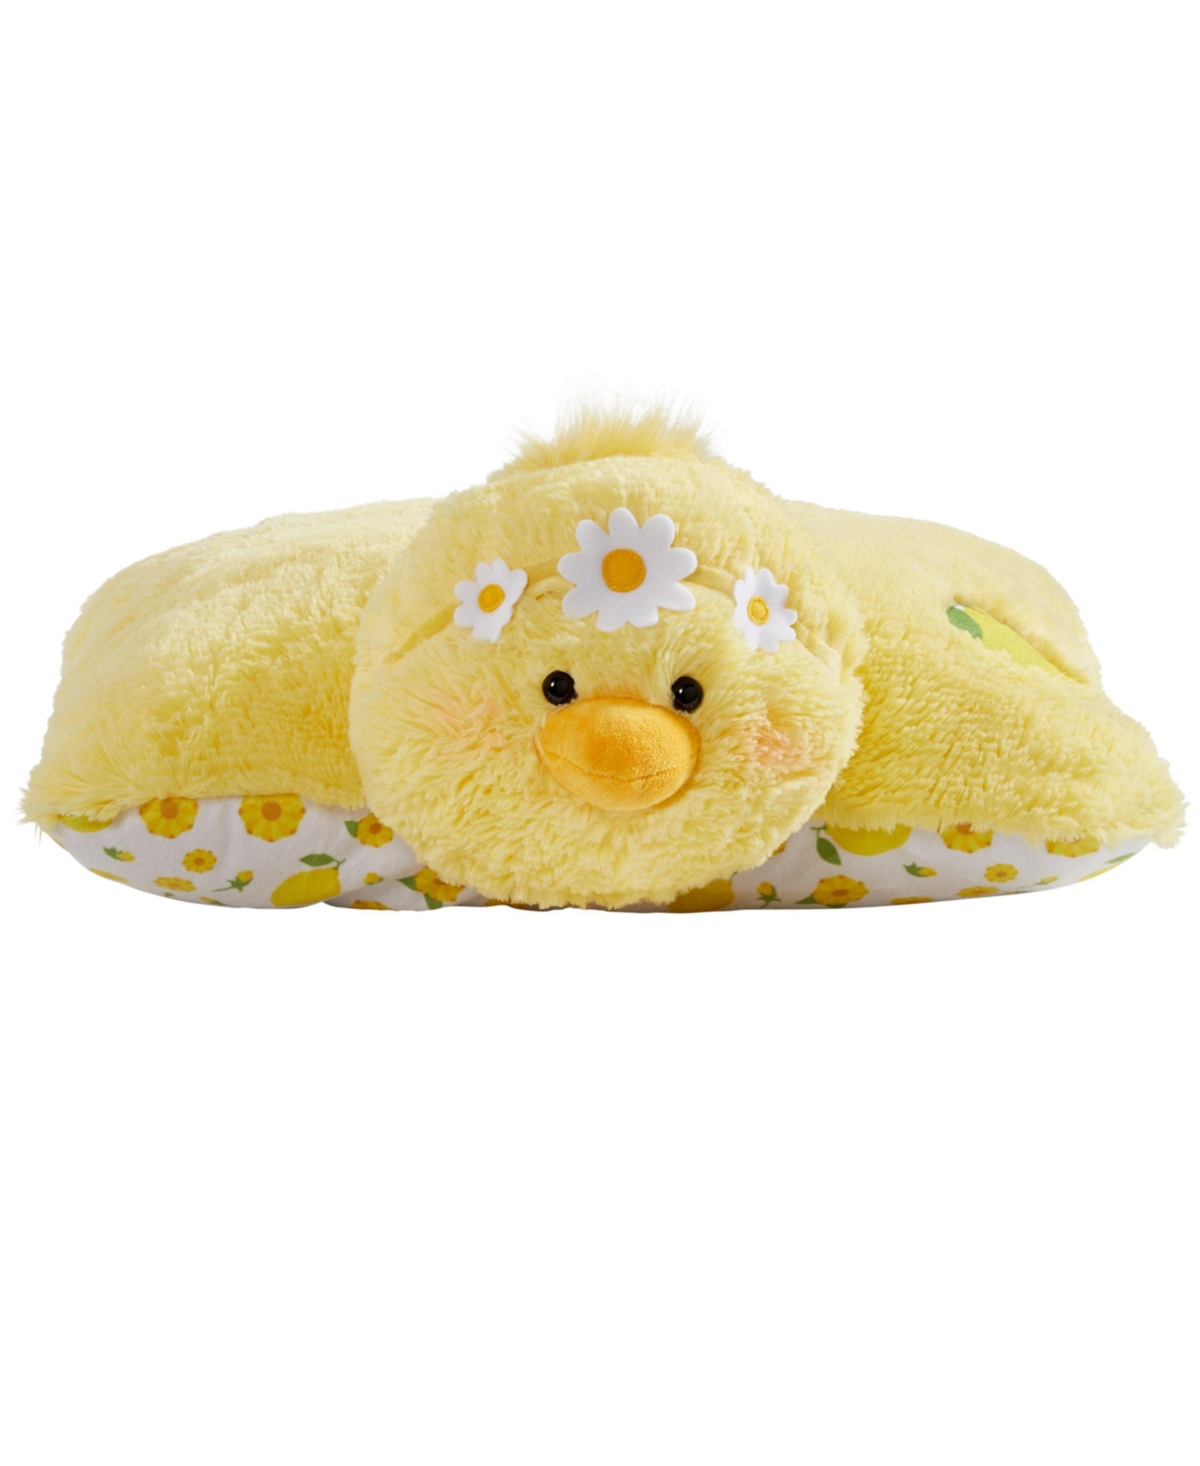 Shop Pillow Pets Sweet Scented Lemon Chick Plush Toy In Yellow